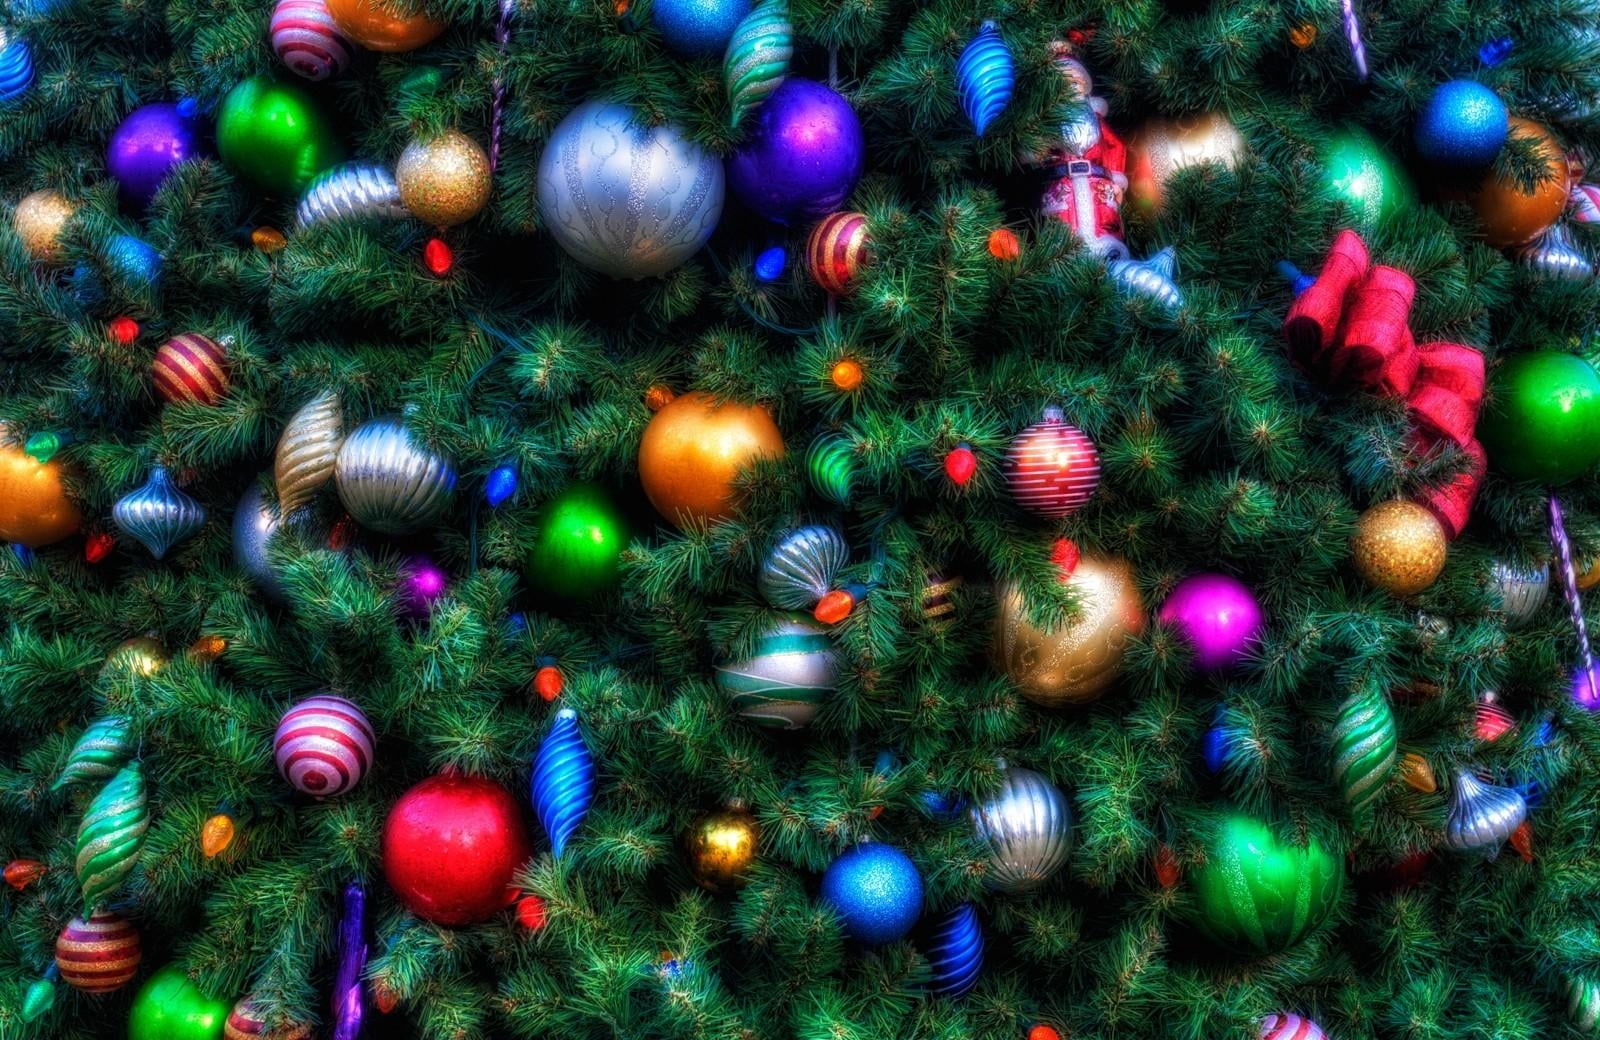 assorted color Christmas baubles